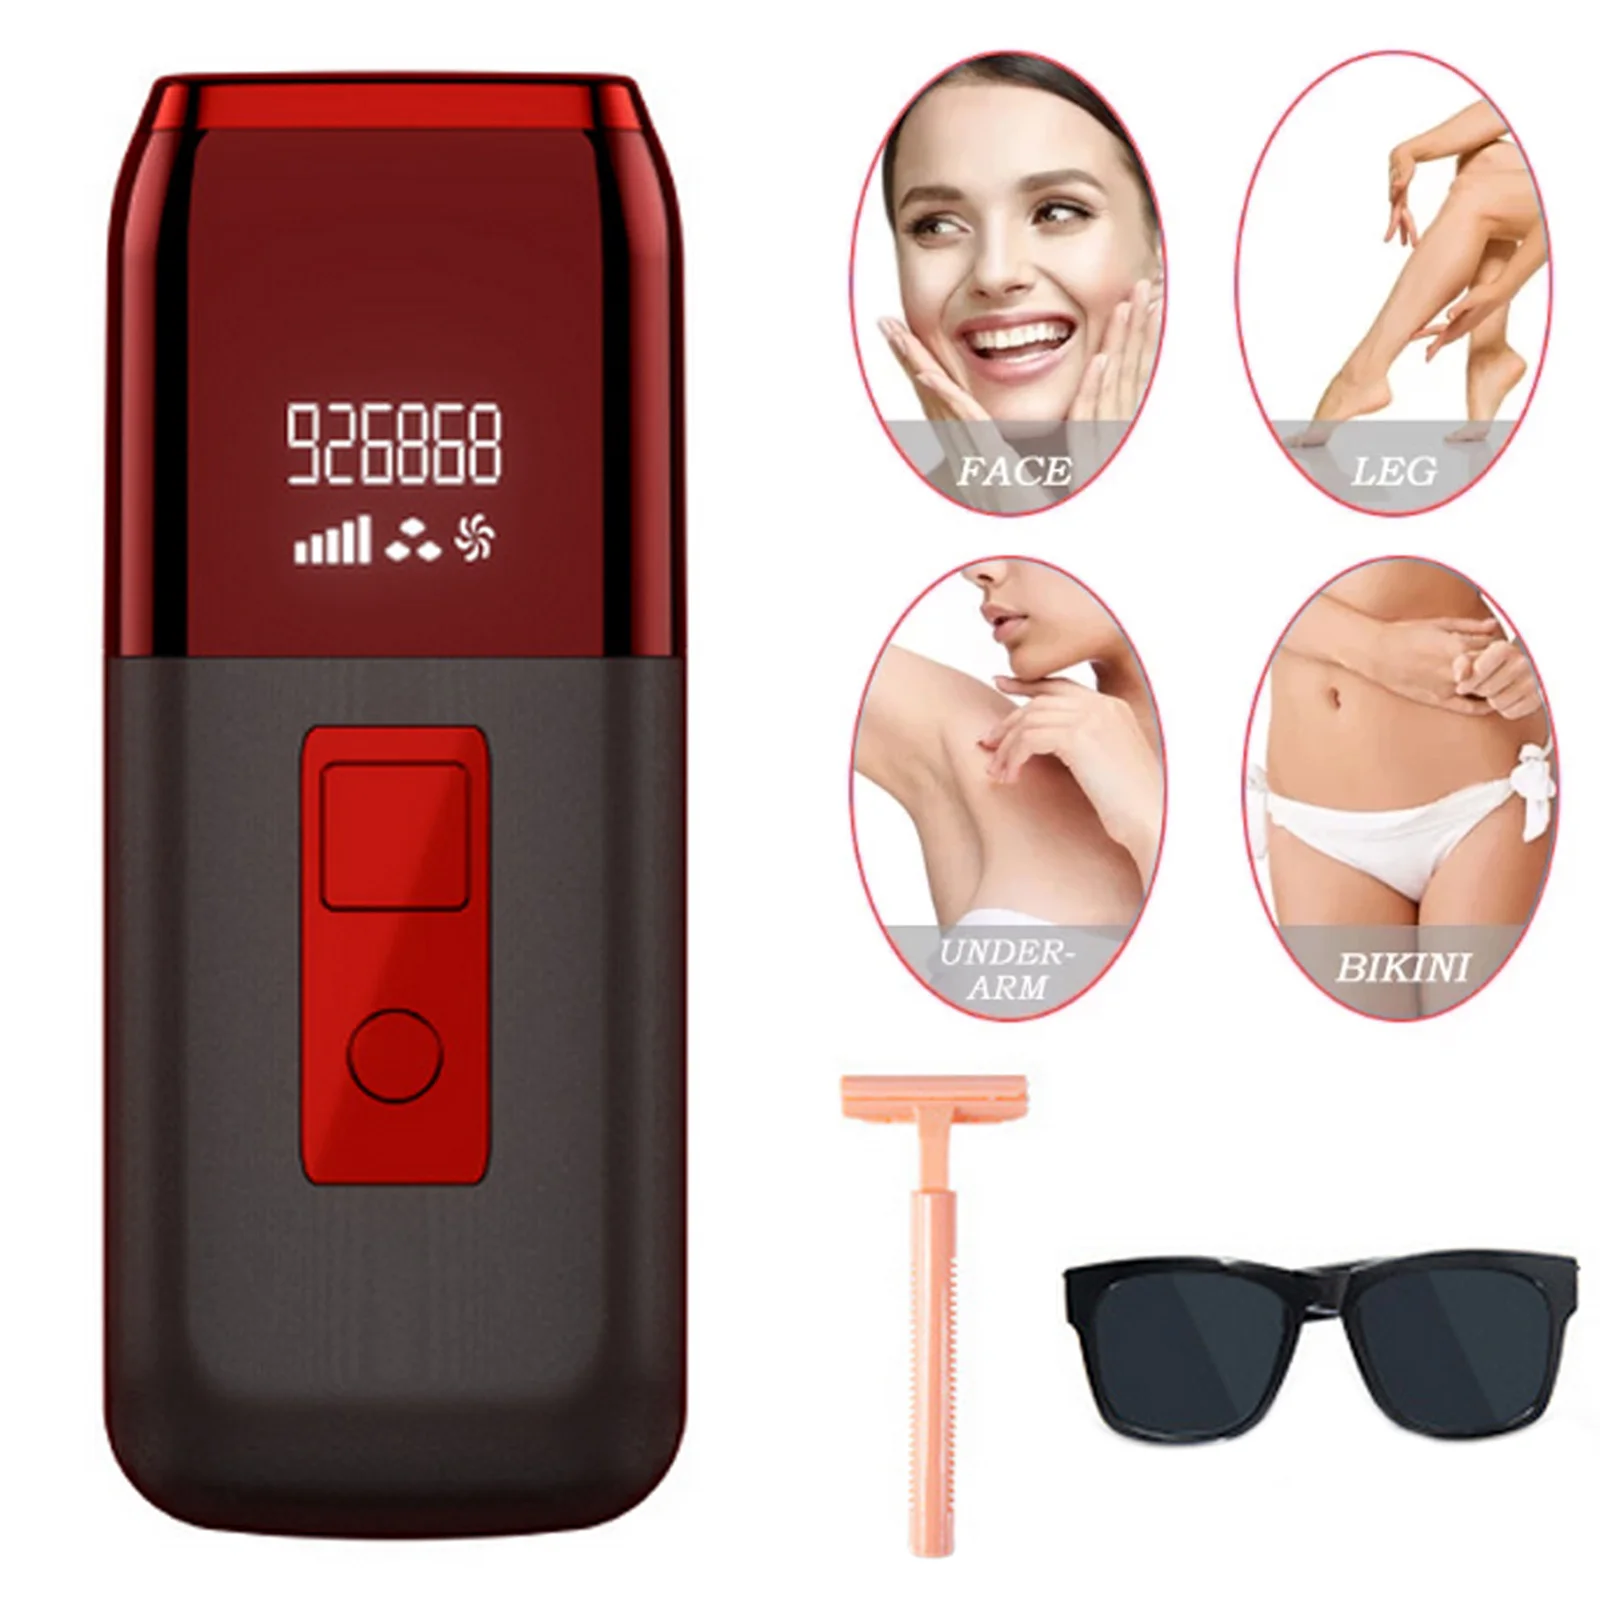 Hair Remover Portable Painless 1000000 Flashes IPL Hair Removal Device Machine with Shaver Goggles Whole Body Home Use EU Plug